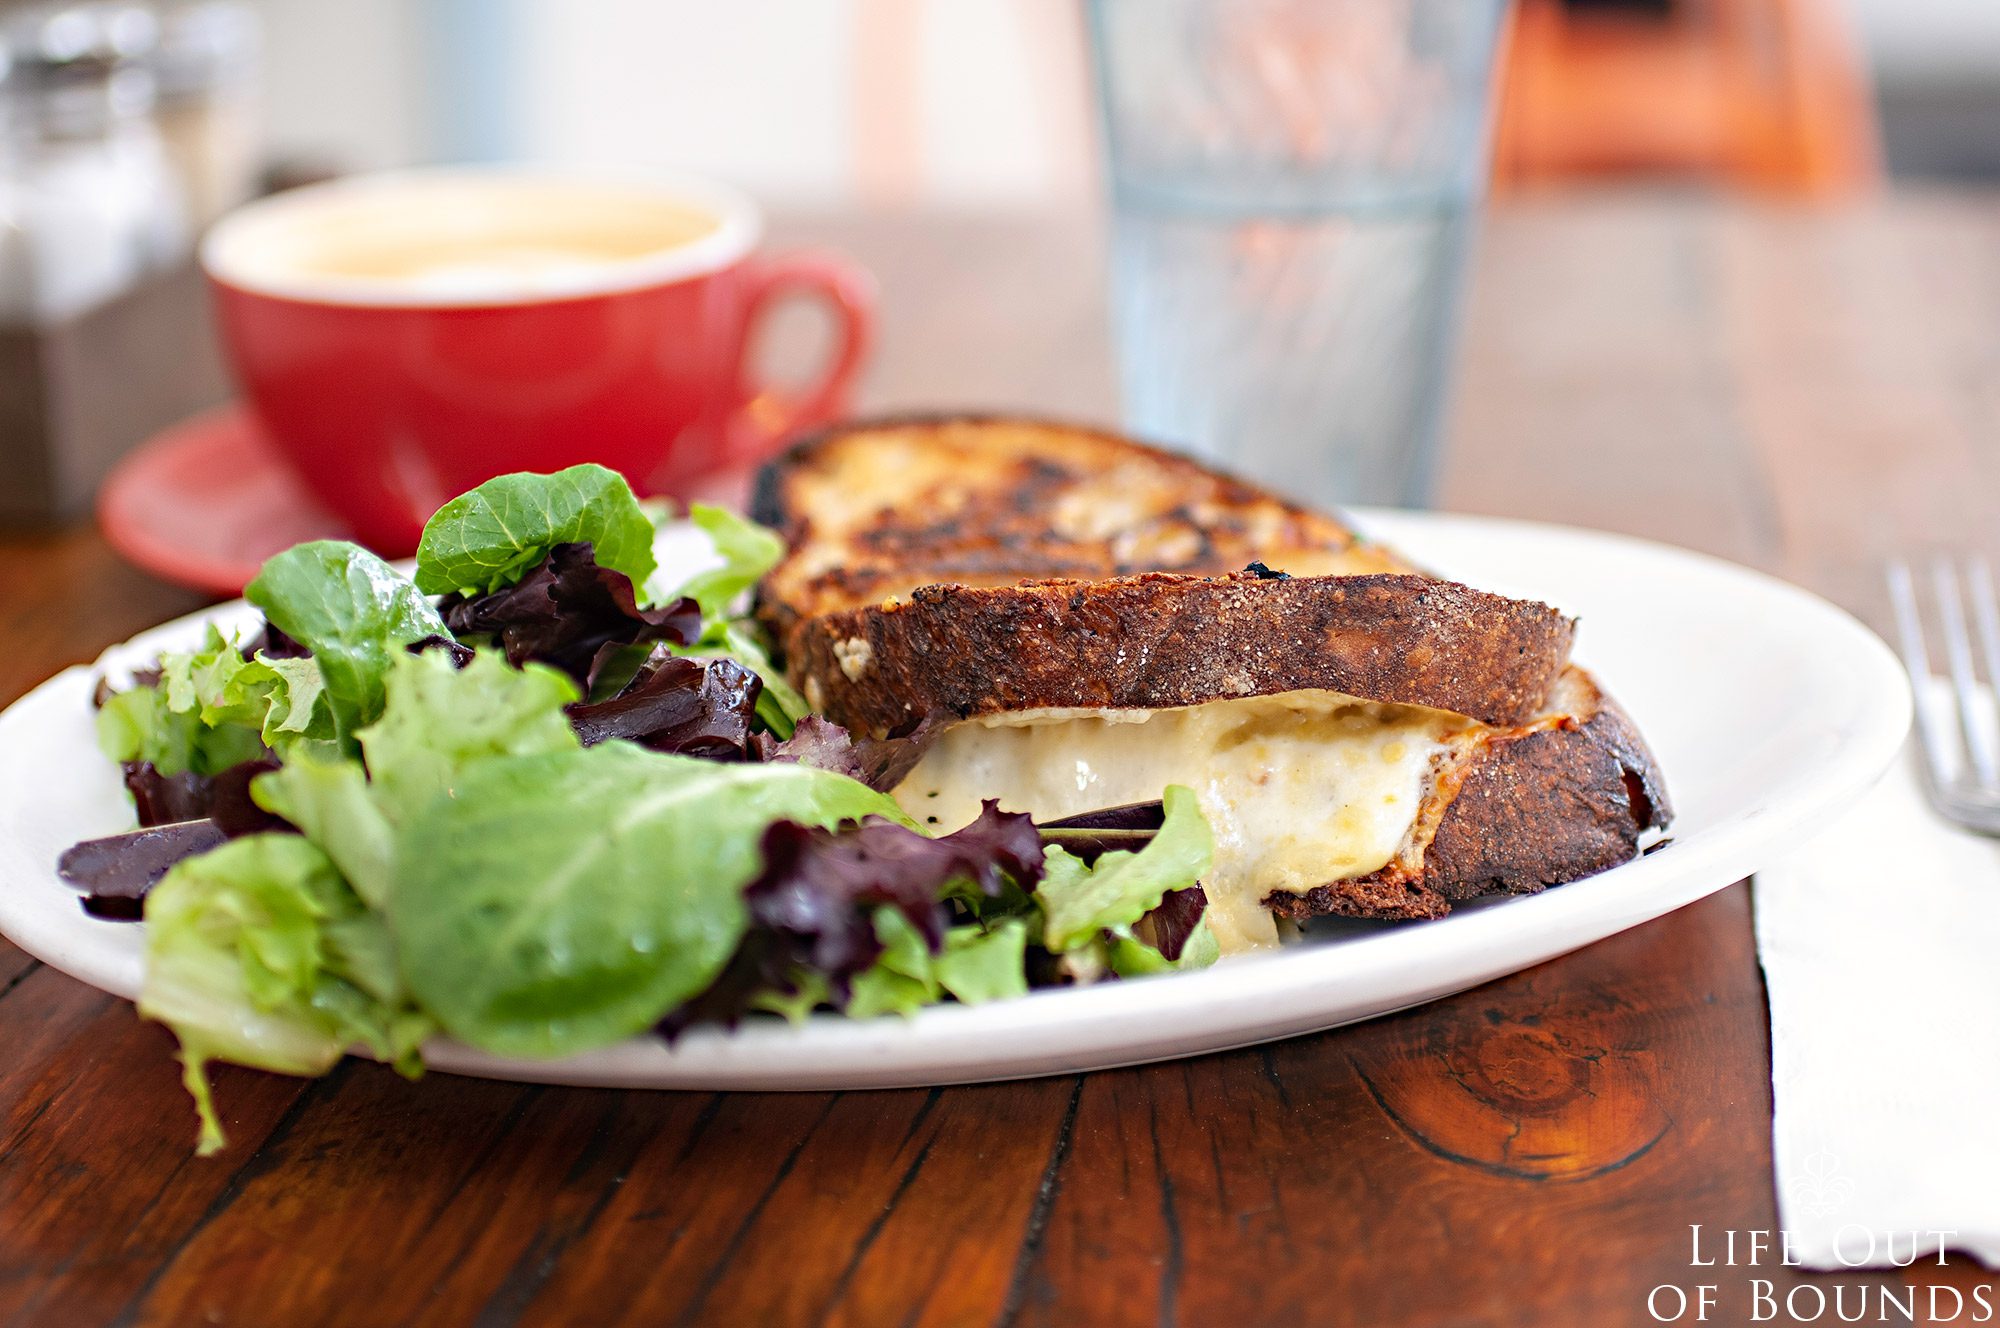 Grilled-Cheese-Sandwich-and-Salad-at-Sunflower-Caffe-in-Sonoma-California